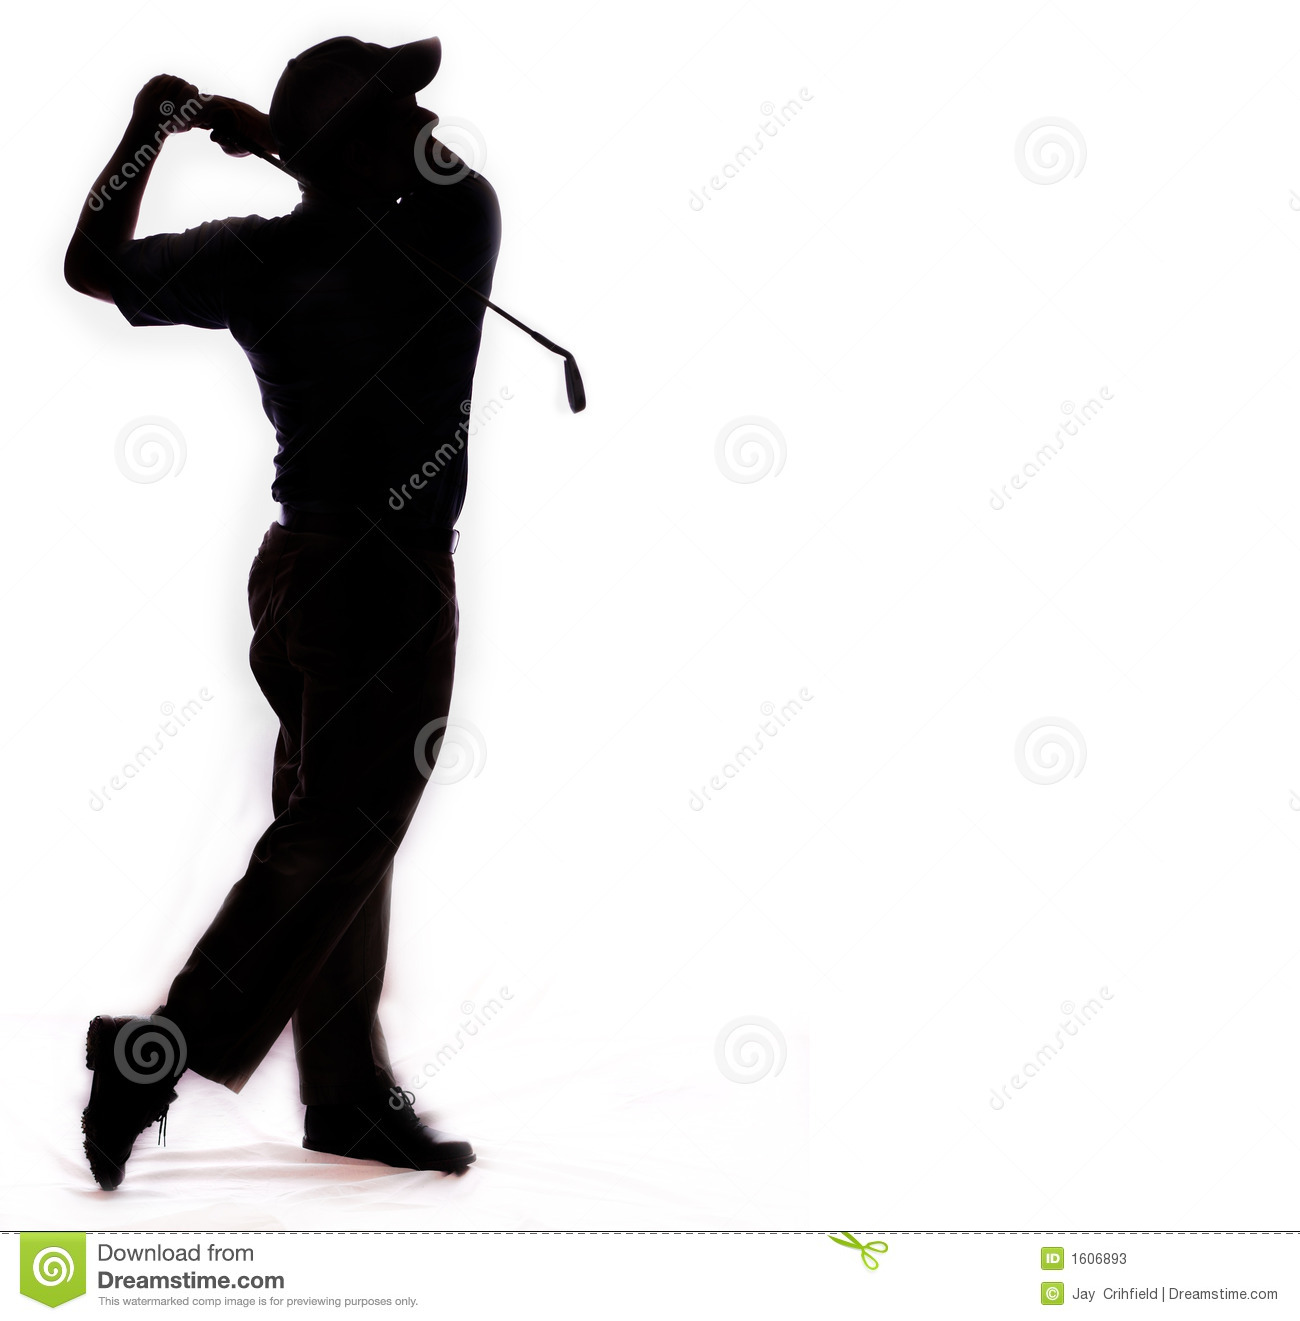 Golfer Looking At Golf Ball After Swinging Club Sihloutette Against